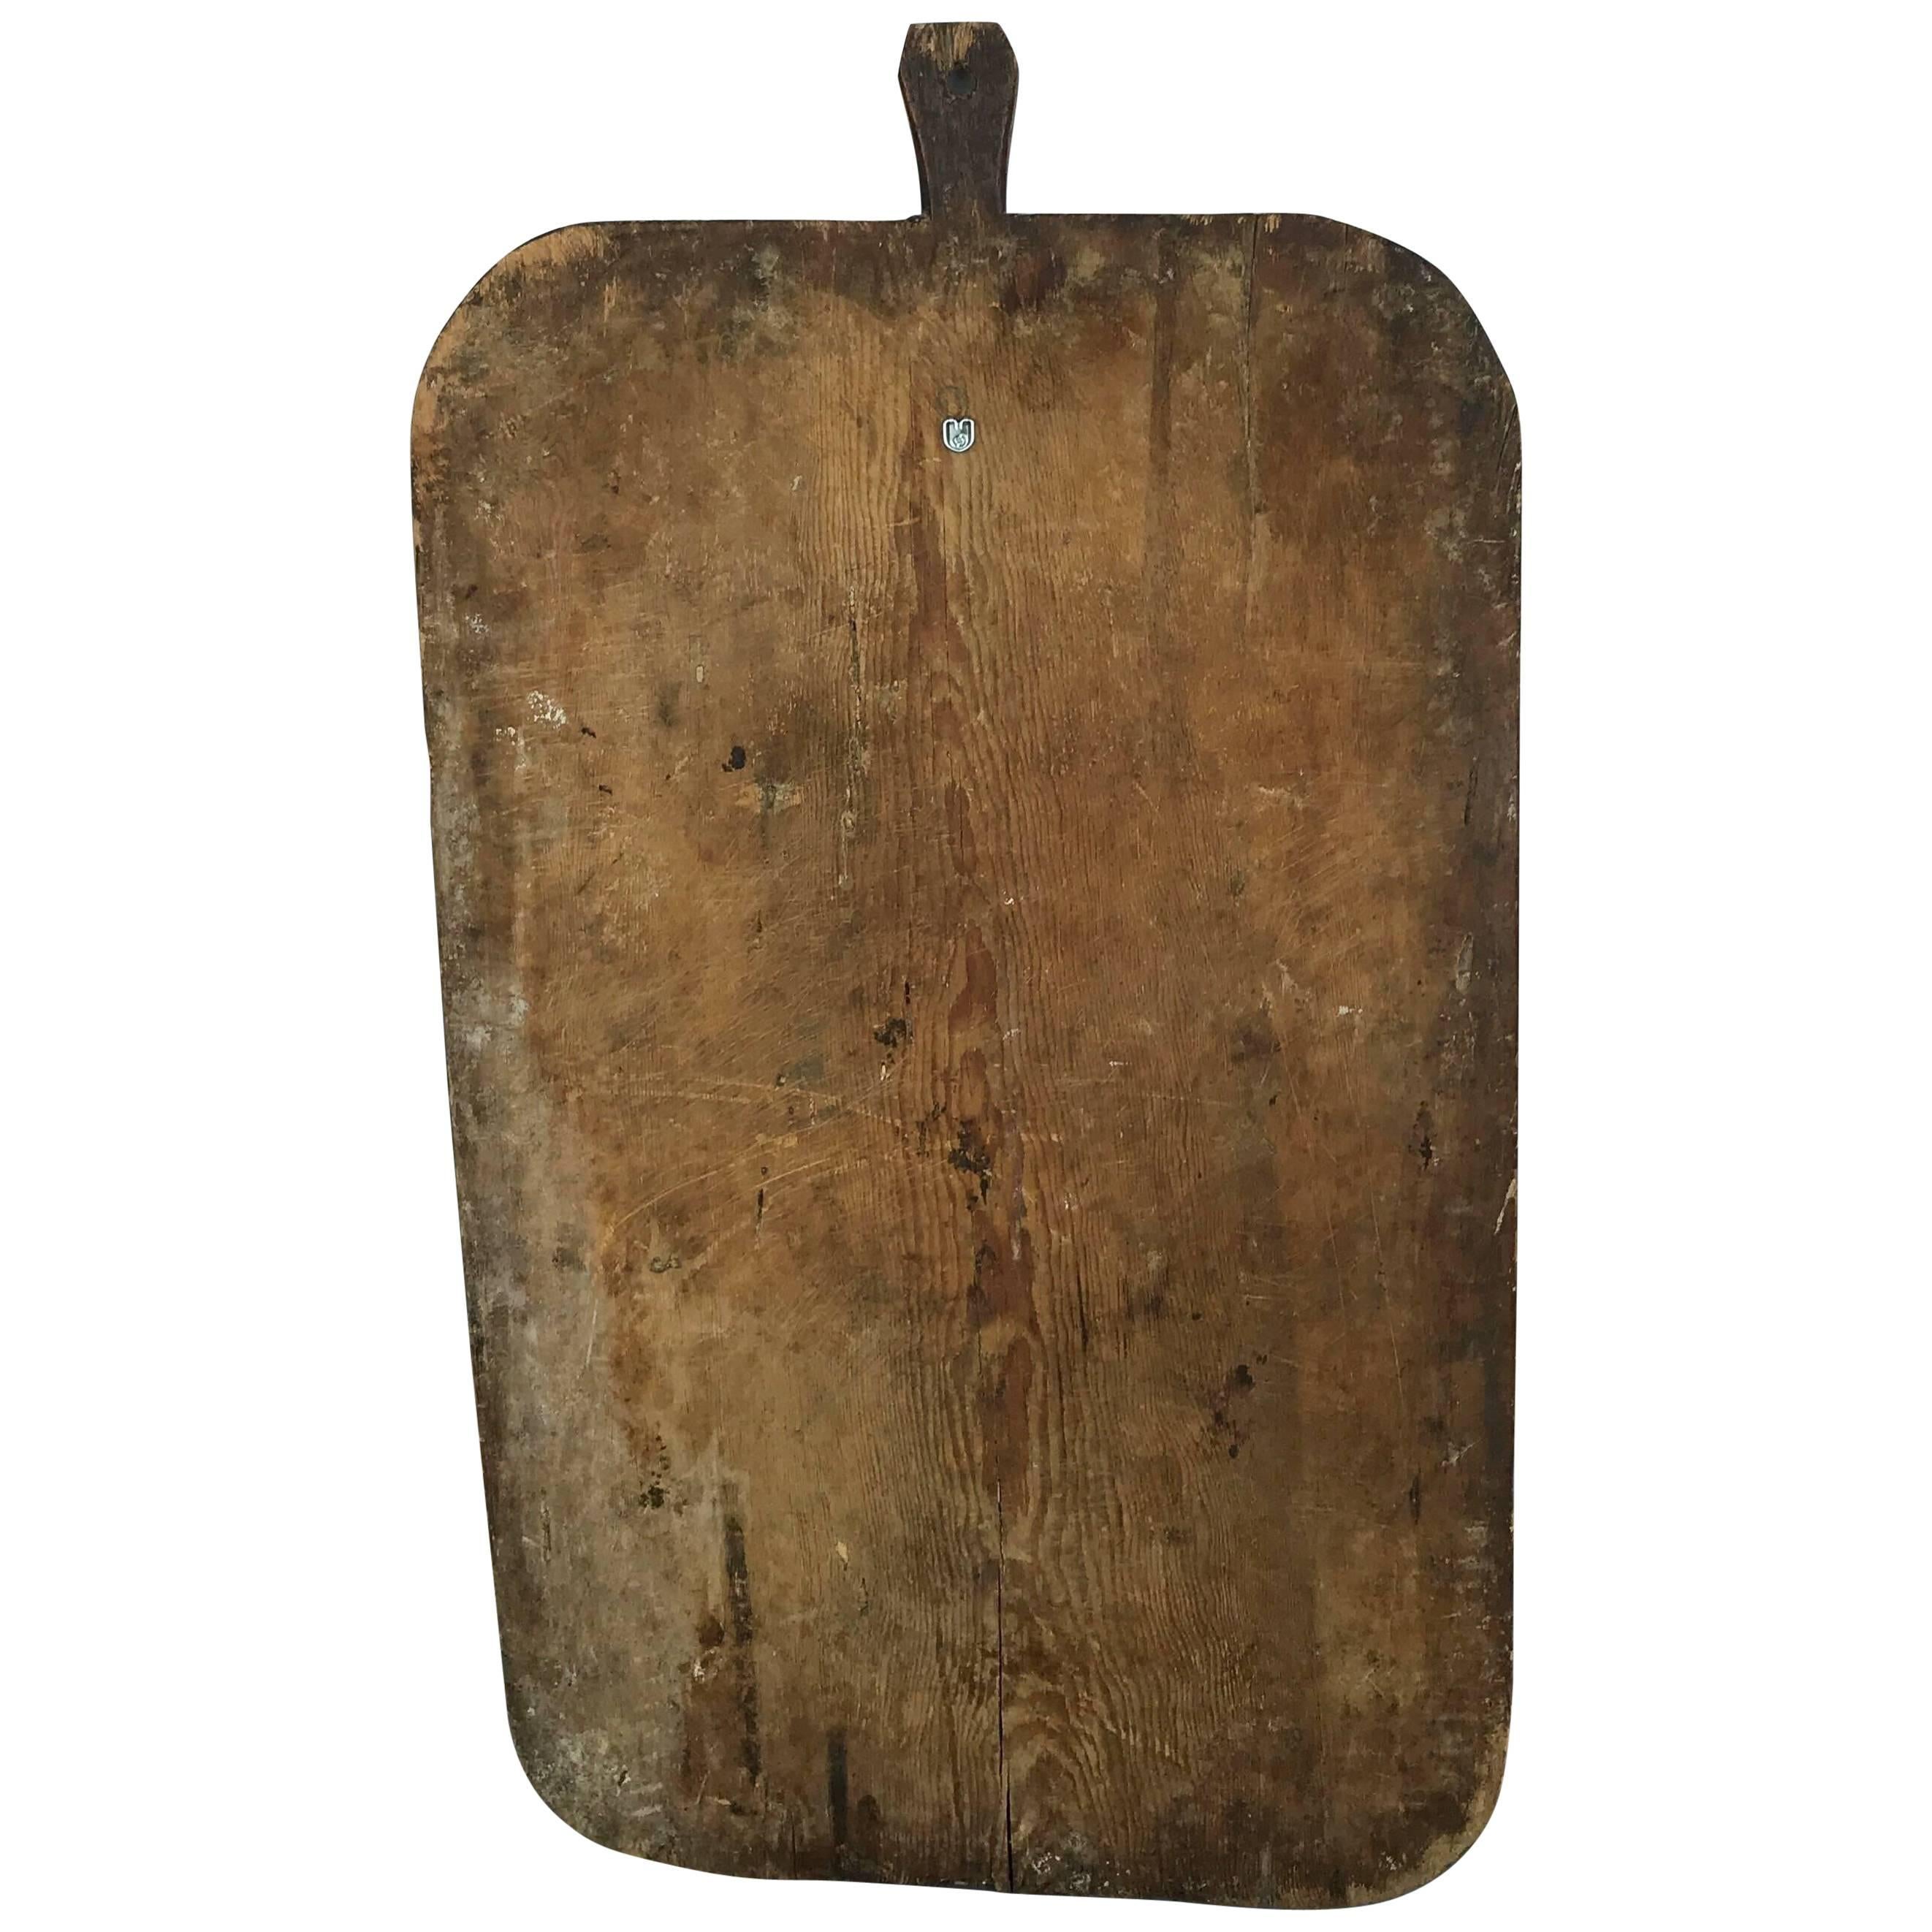 Early 20th Century European Cutting or Bread Board from France